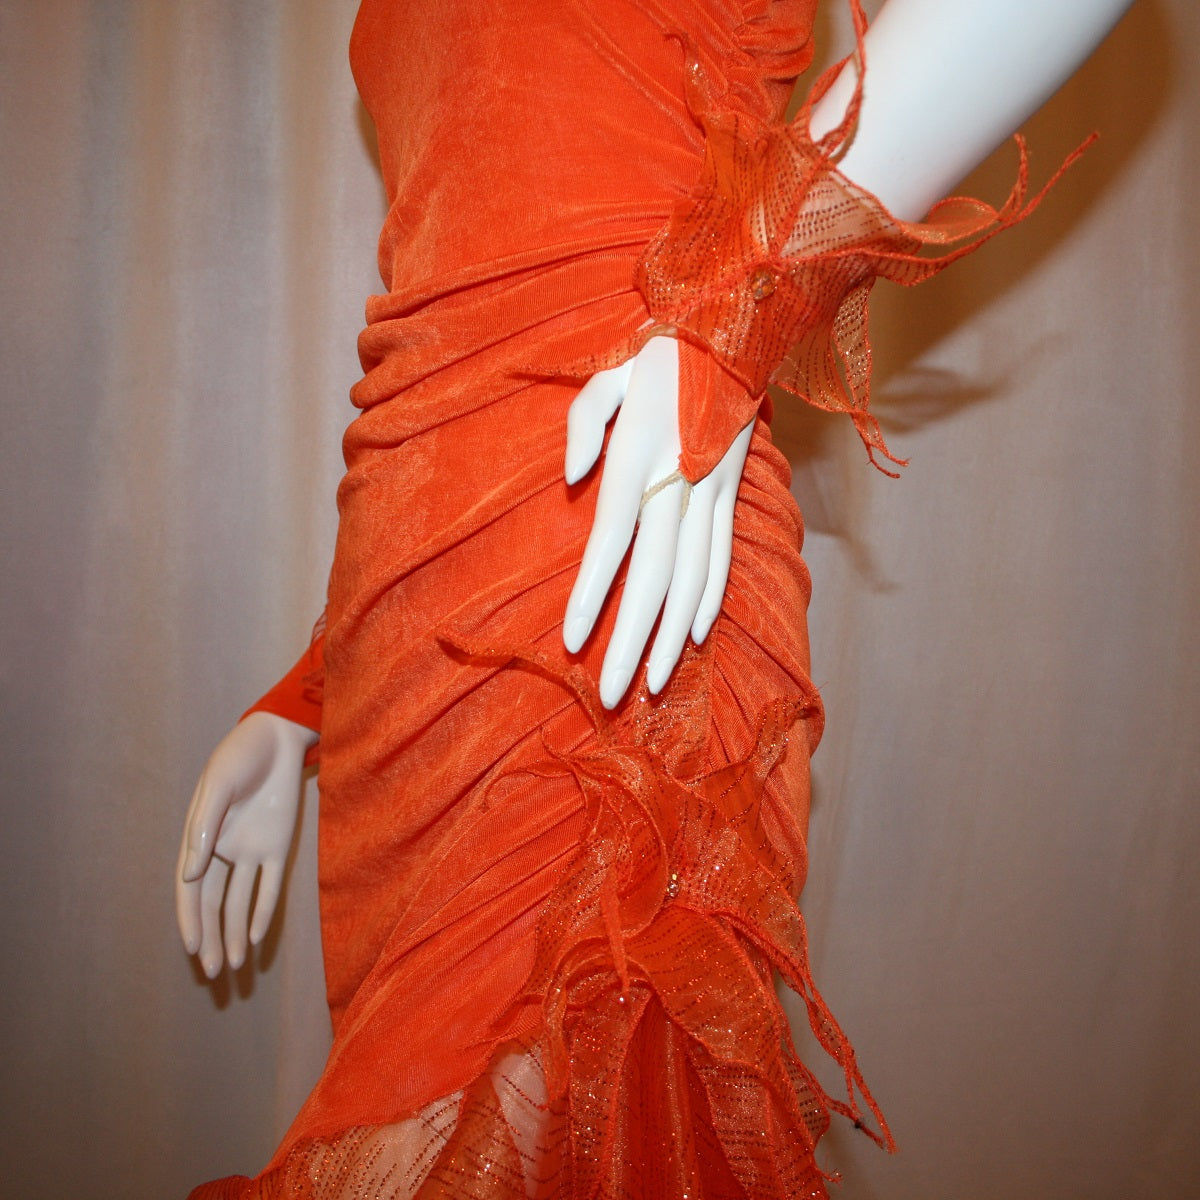 Crystal's Creations close up left side view of Orange Latin/rhythm dress was created in luxurious orange solid slinky with oodles of glitter organza flounces & accents, embellished with a touch of Swarovski hand beading.